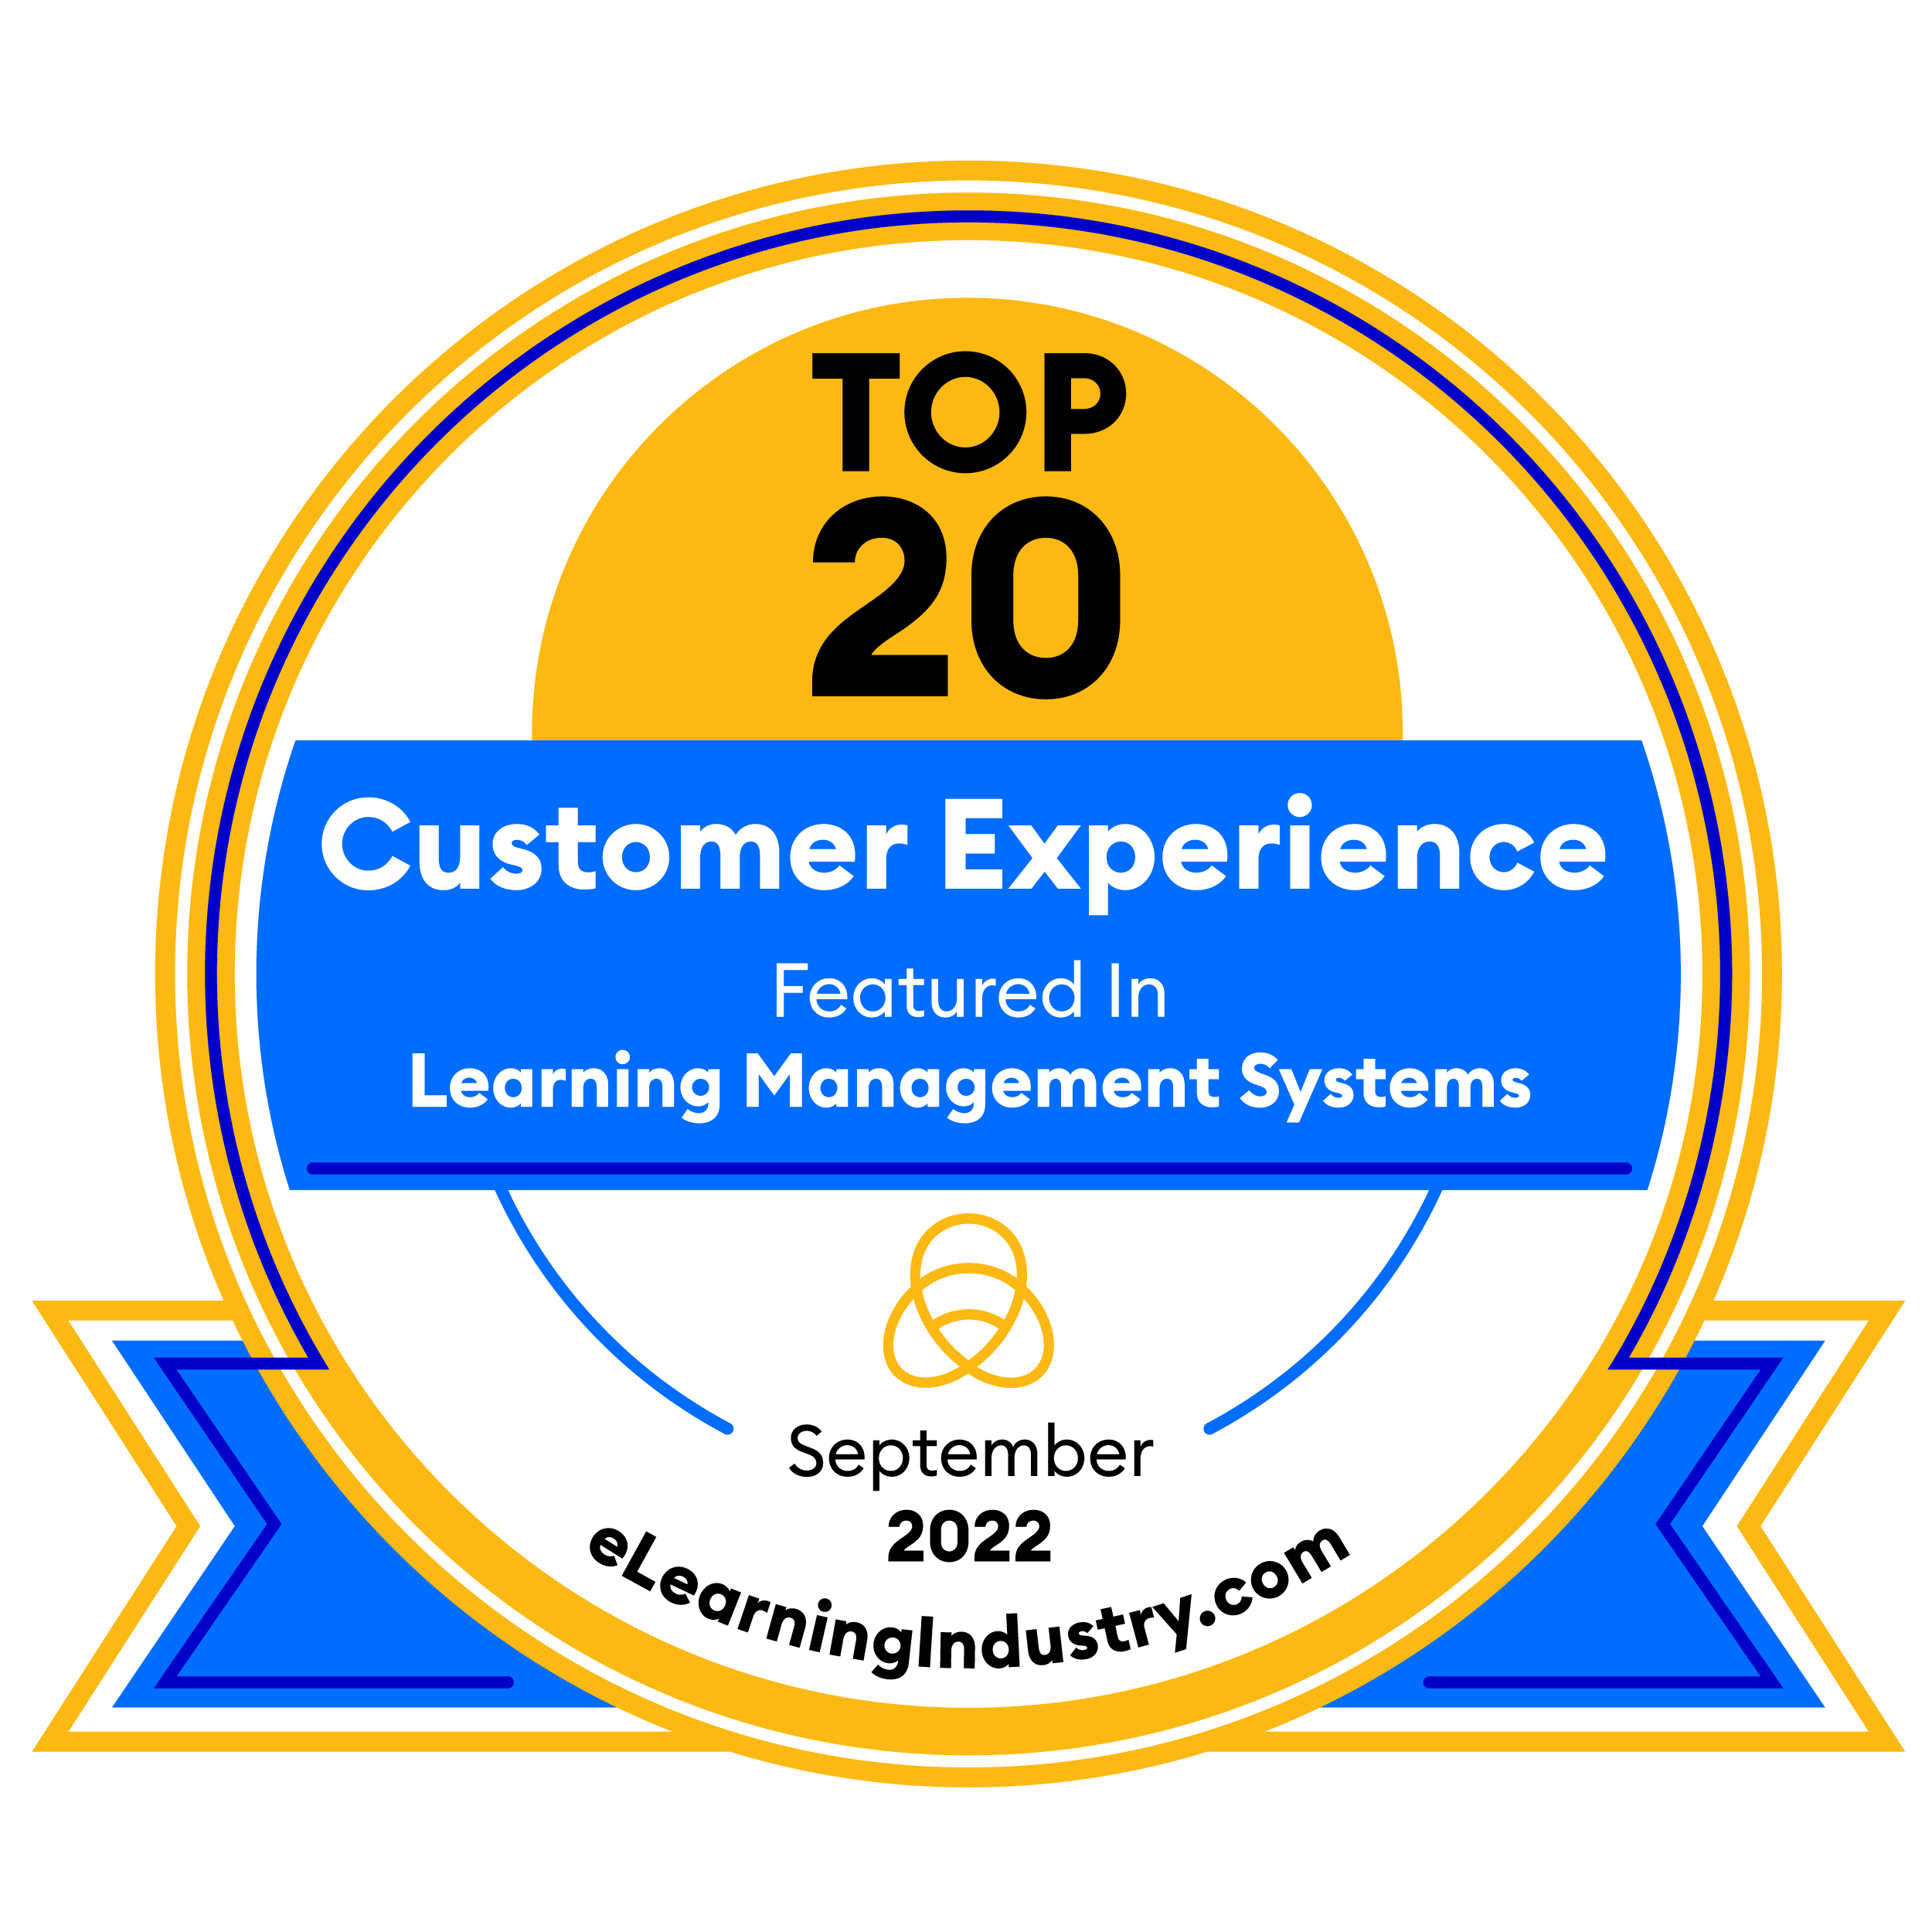 eLearning Industry ranked GyrusAim as # 5 in the Top 20 LMS for Customer Experience